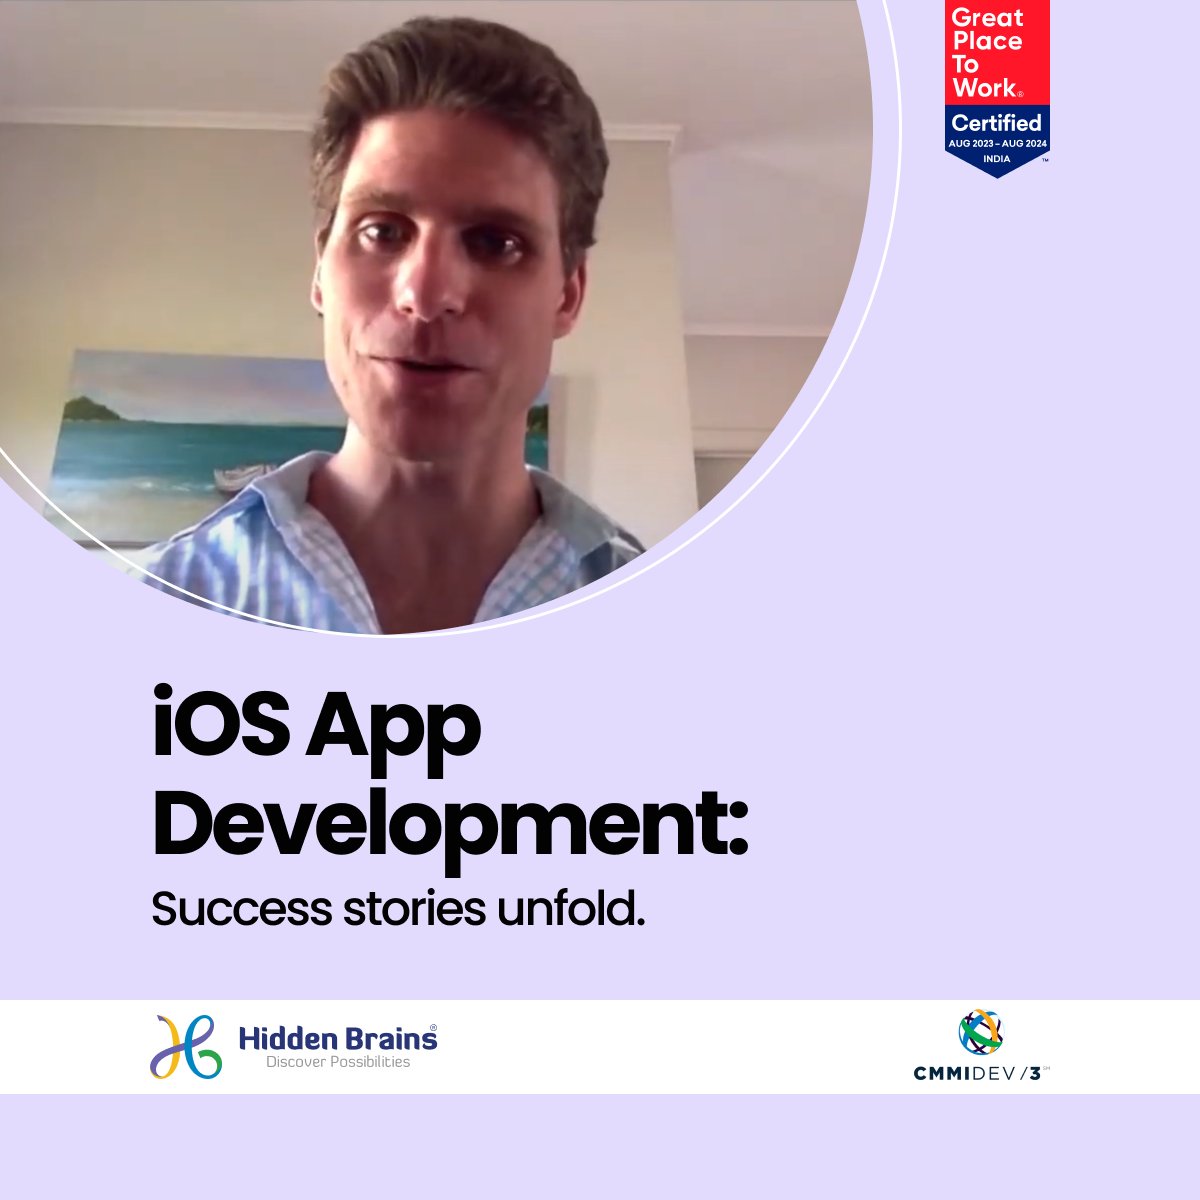 Unlock new opportunities with our iOS app development success stories! Dive into innovation with us.

Explore: youtu.be/0iJKiPakWOE

#iOSAppDevelopment #iOSDevelopment #MobileAppDevelopment #HiddenBrains